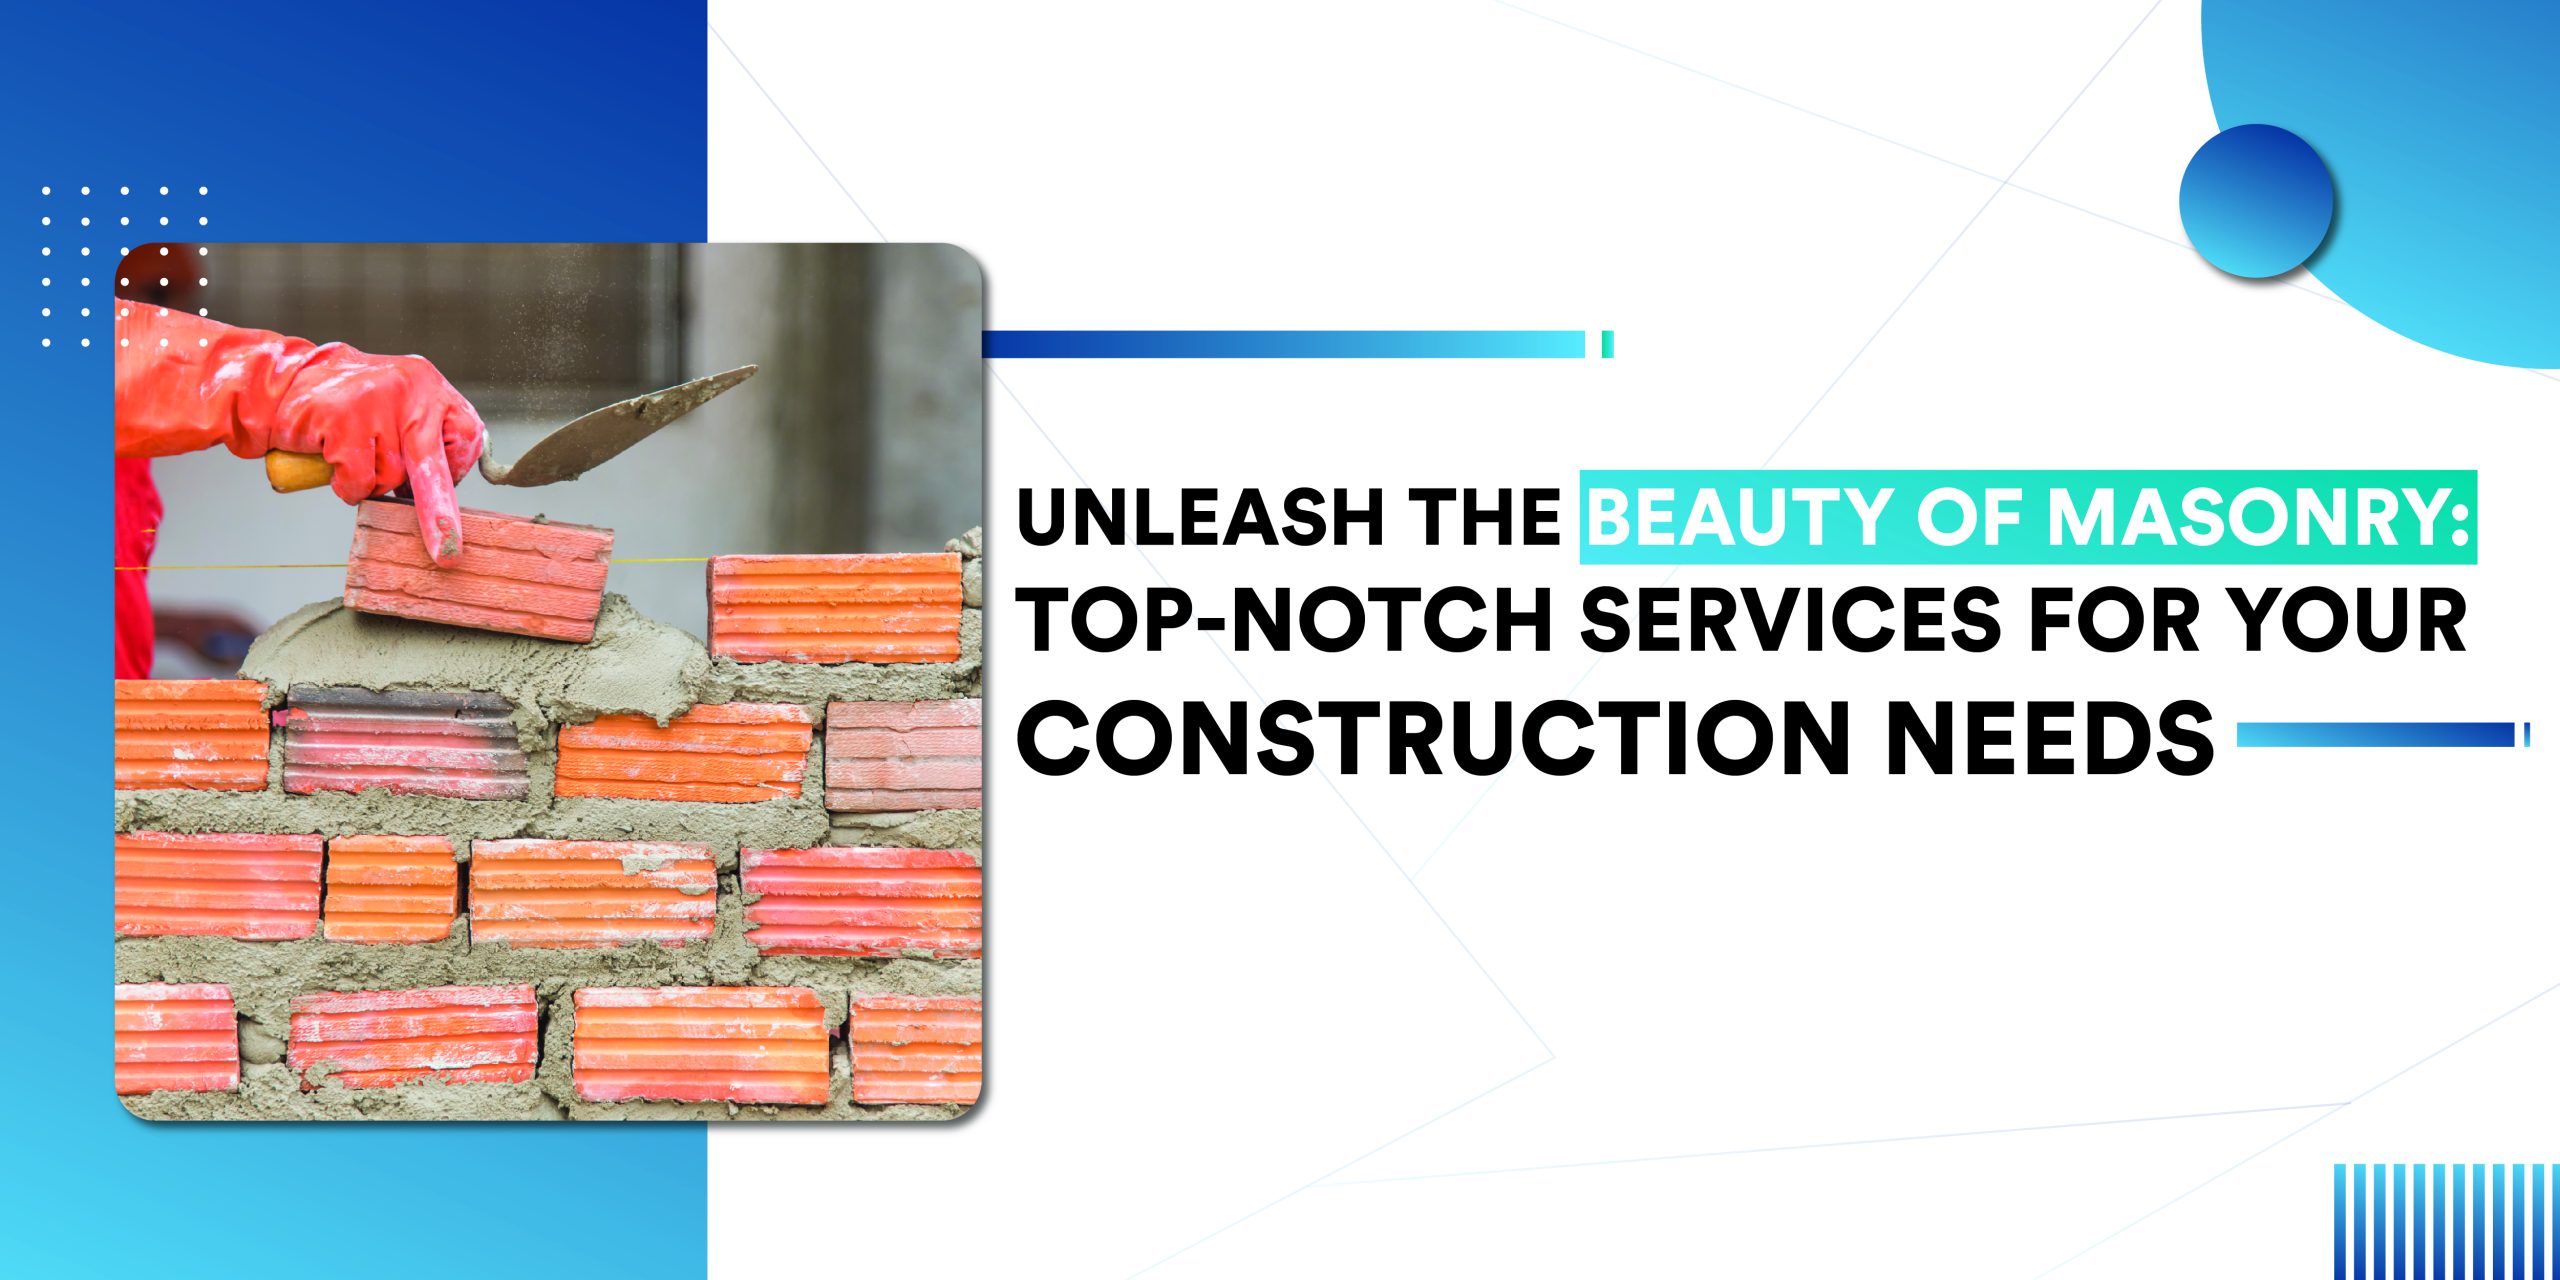 Unleash the Beauty of Masonry: Top-notch Services for Your Construction Needs